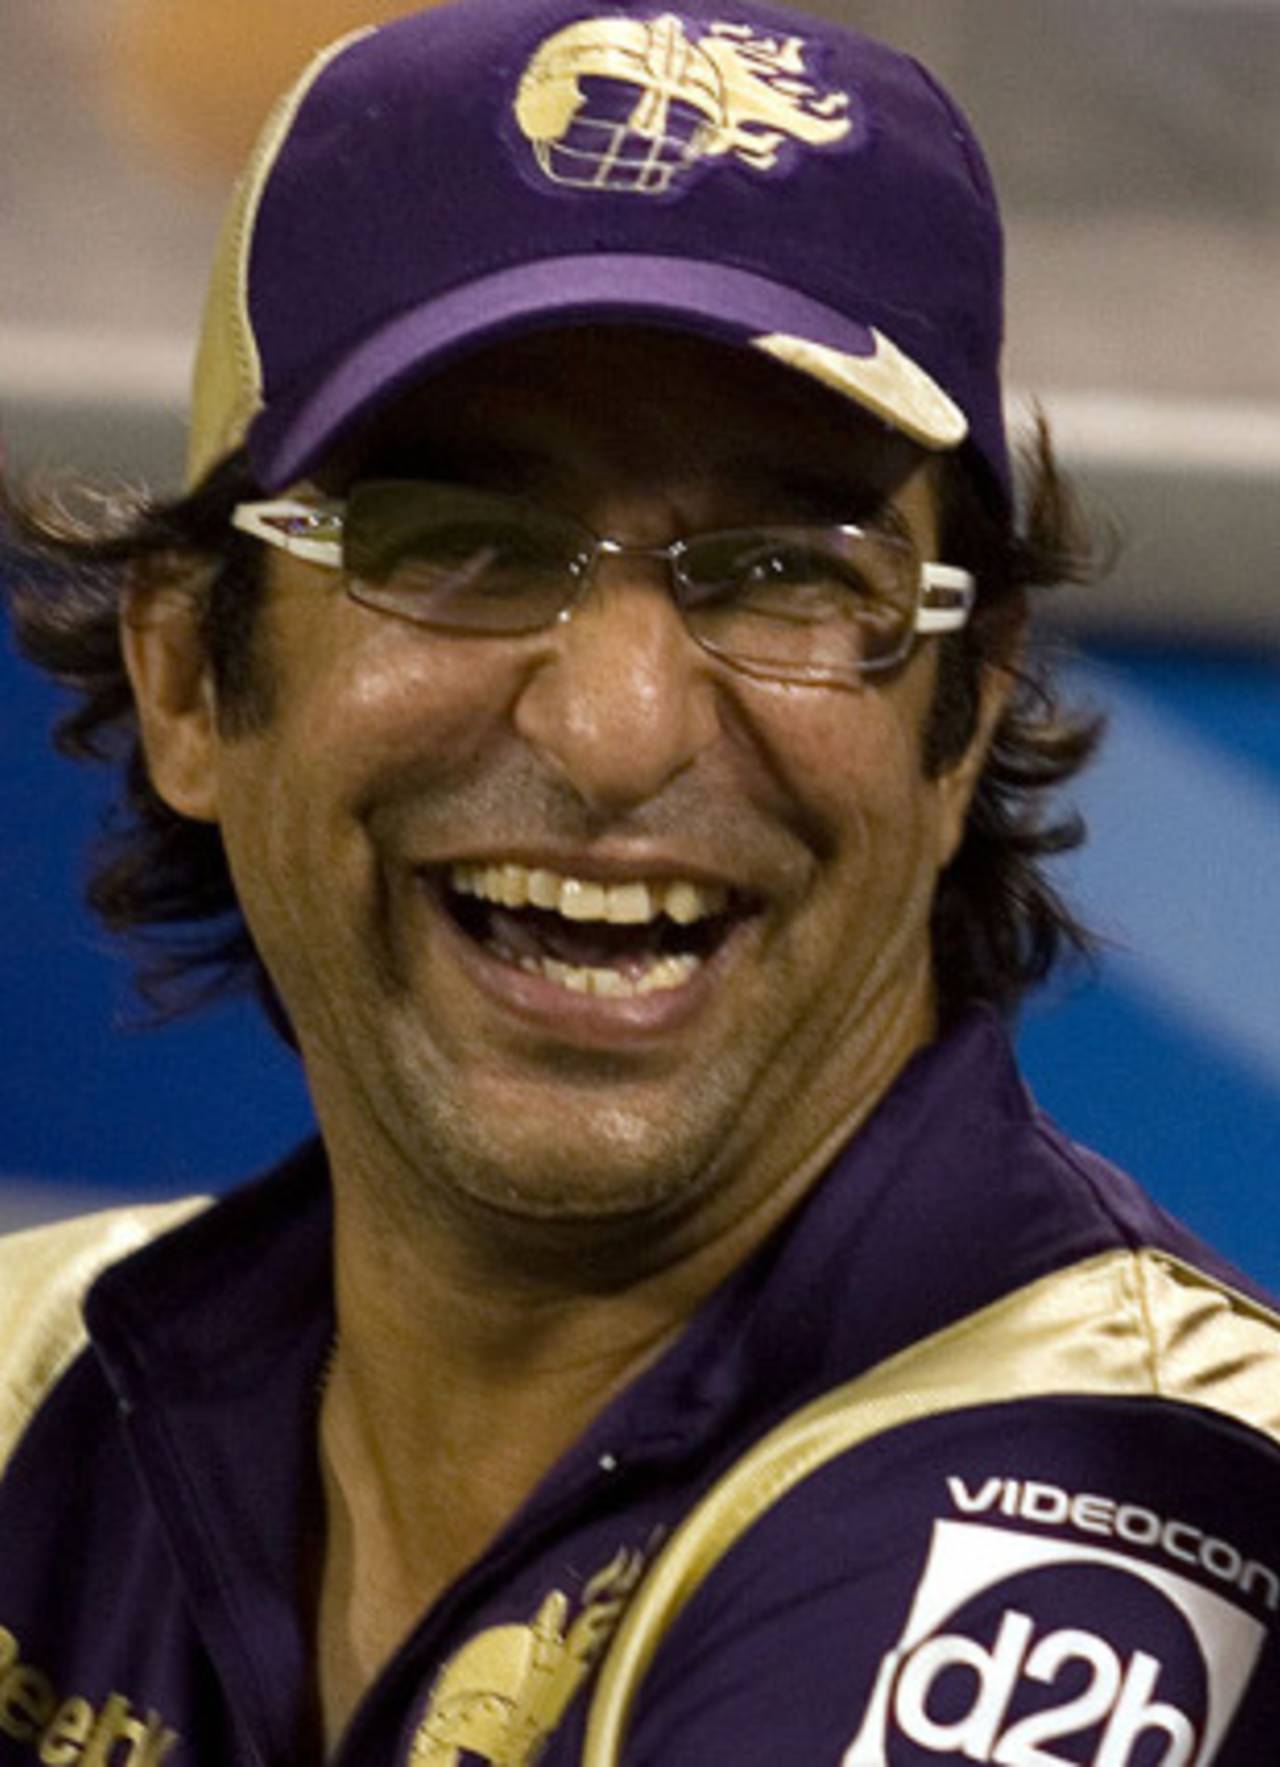 Wasim Akram says rubbing mud on the ball to change its colour also amounts to tampering&nbsp;&nbsp;&bull;&nbsp;&nbsp;Indian Premier League